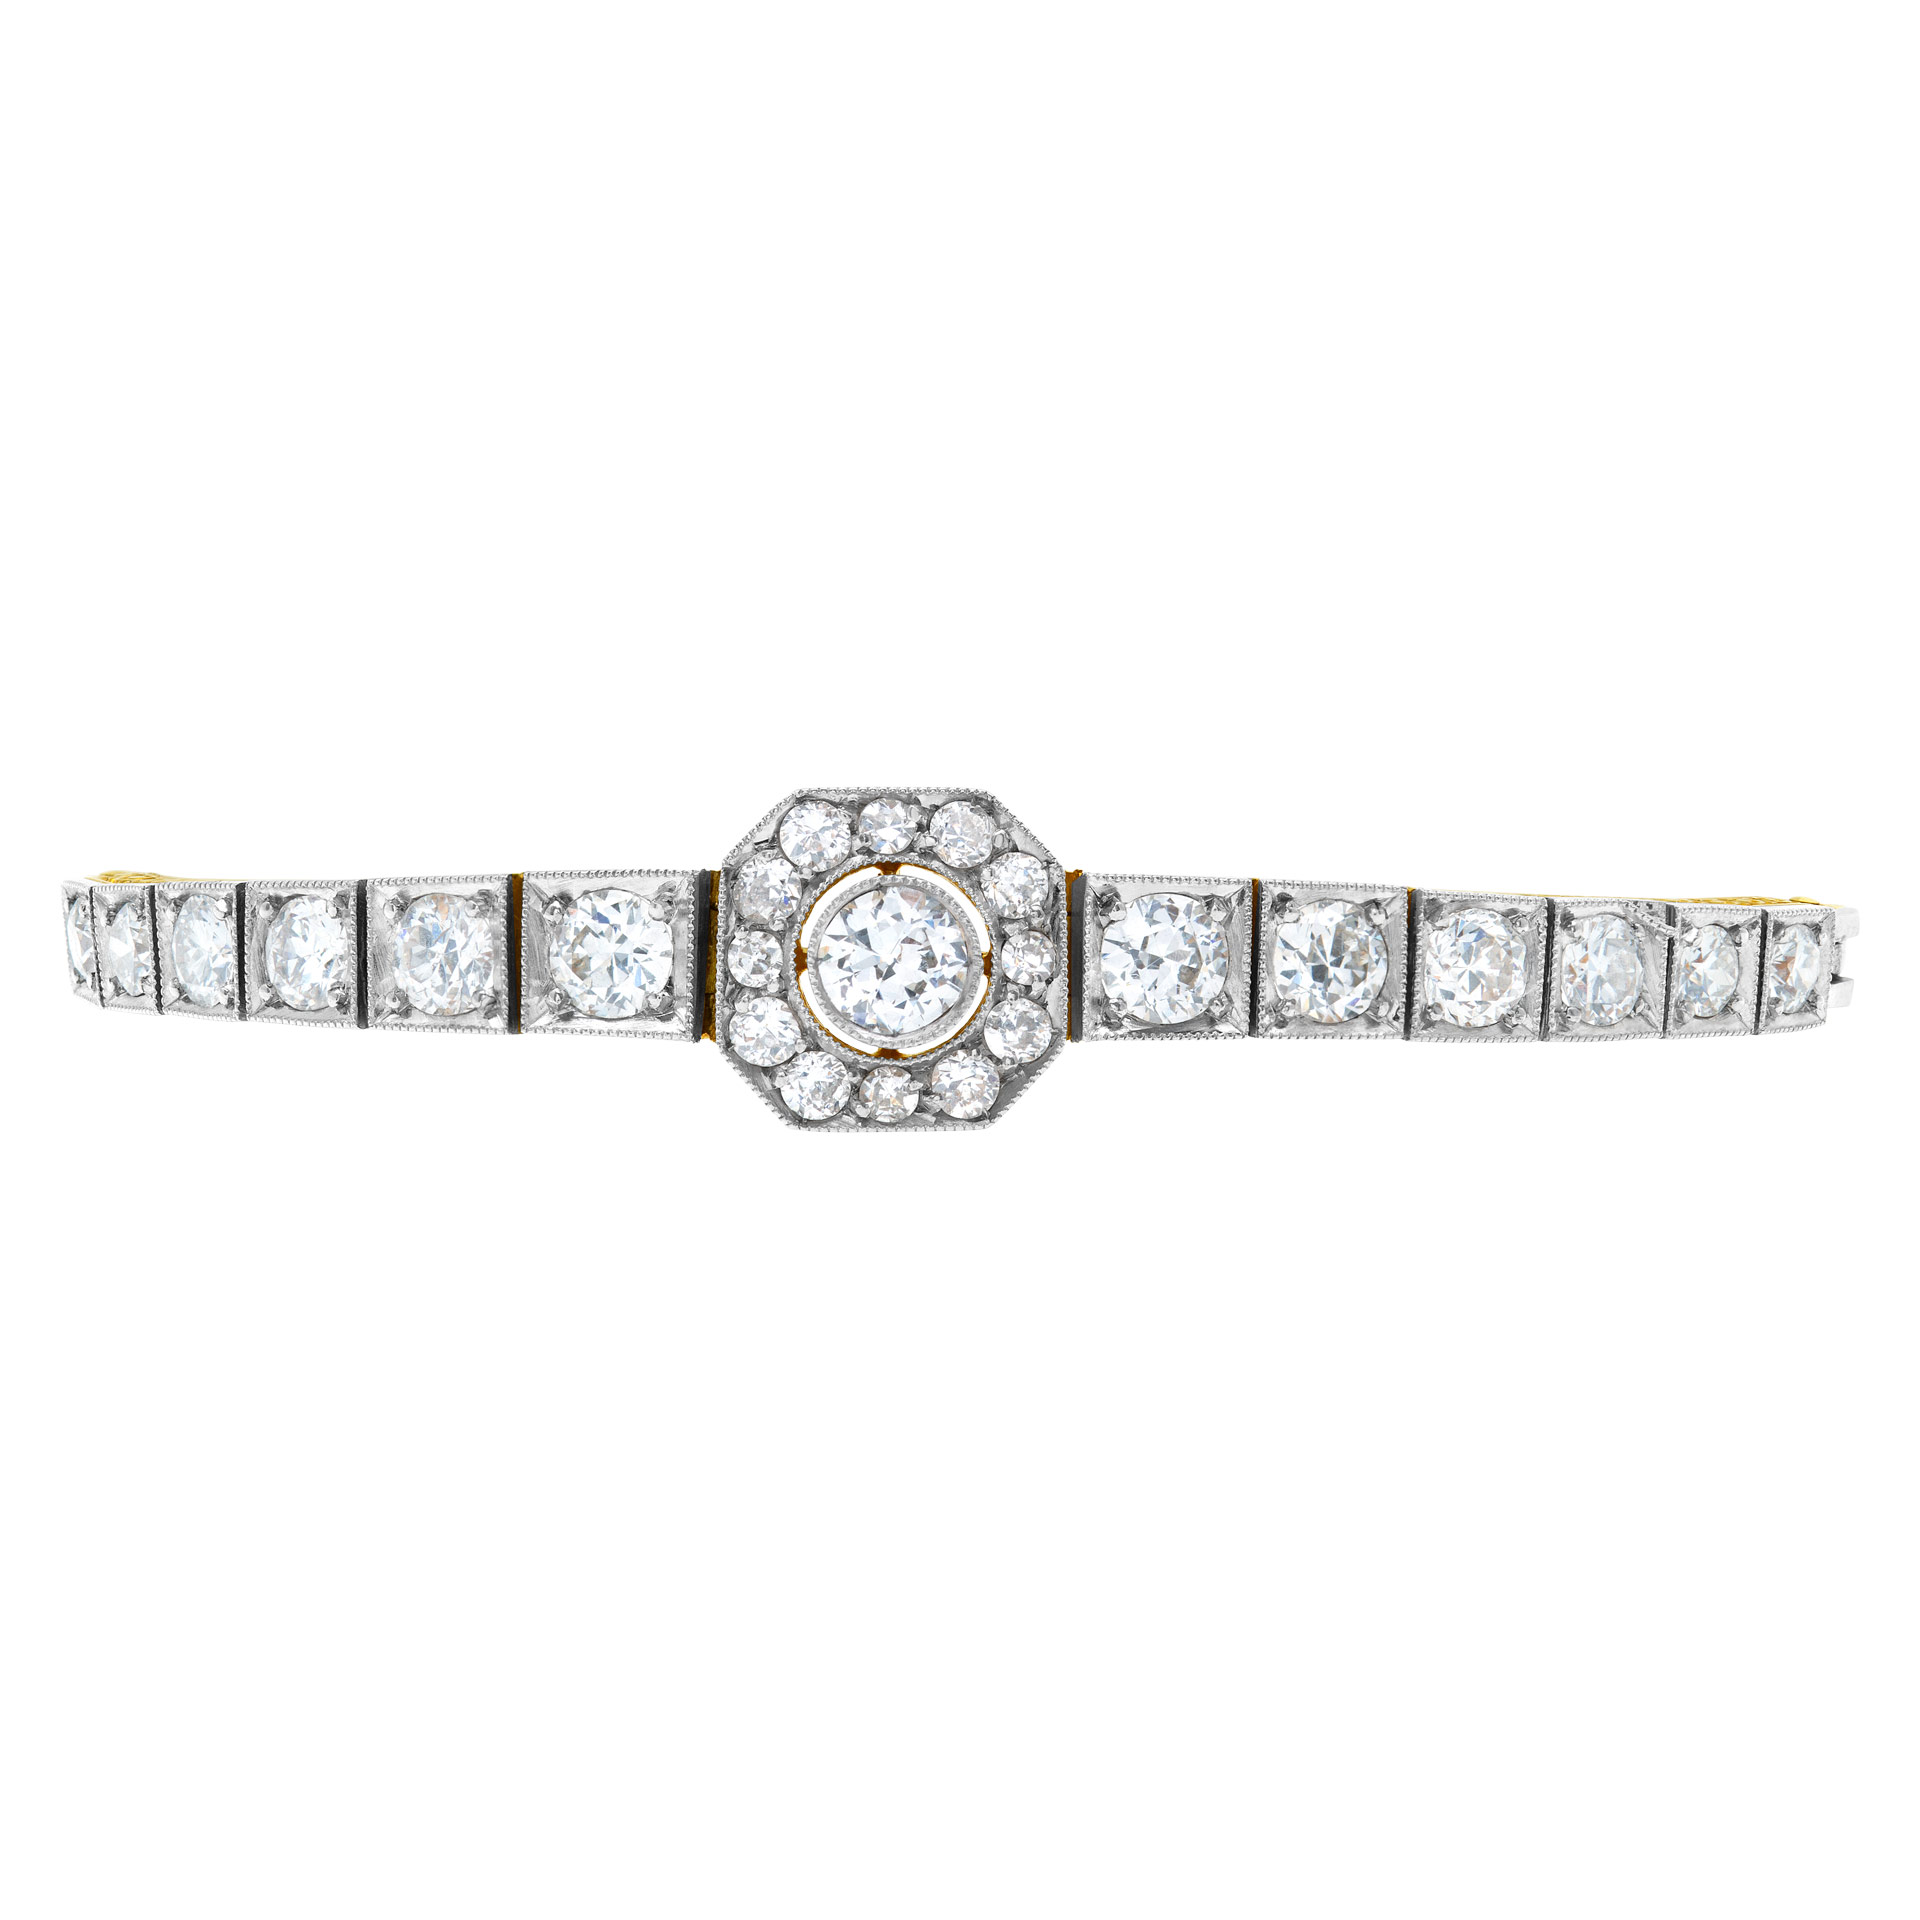 Diamond bracelet in 18k yellow gold with approximately 2 carats in diamonds